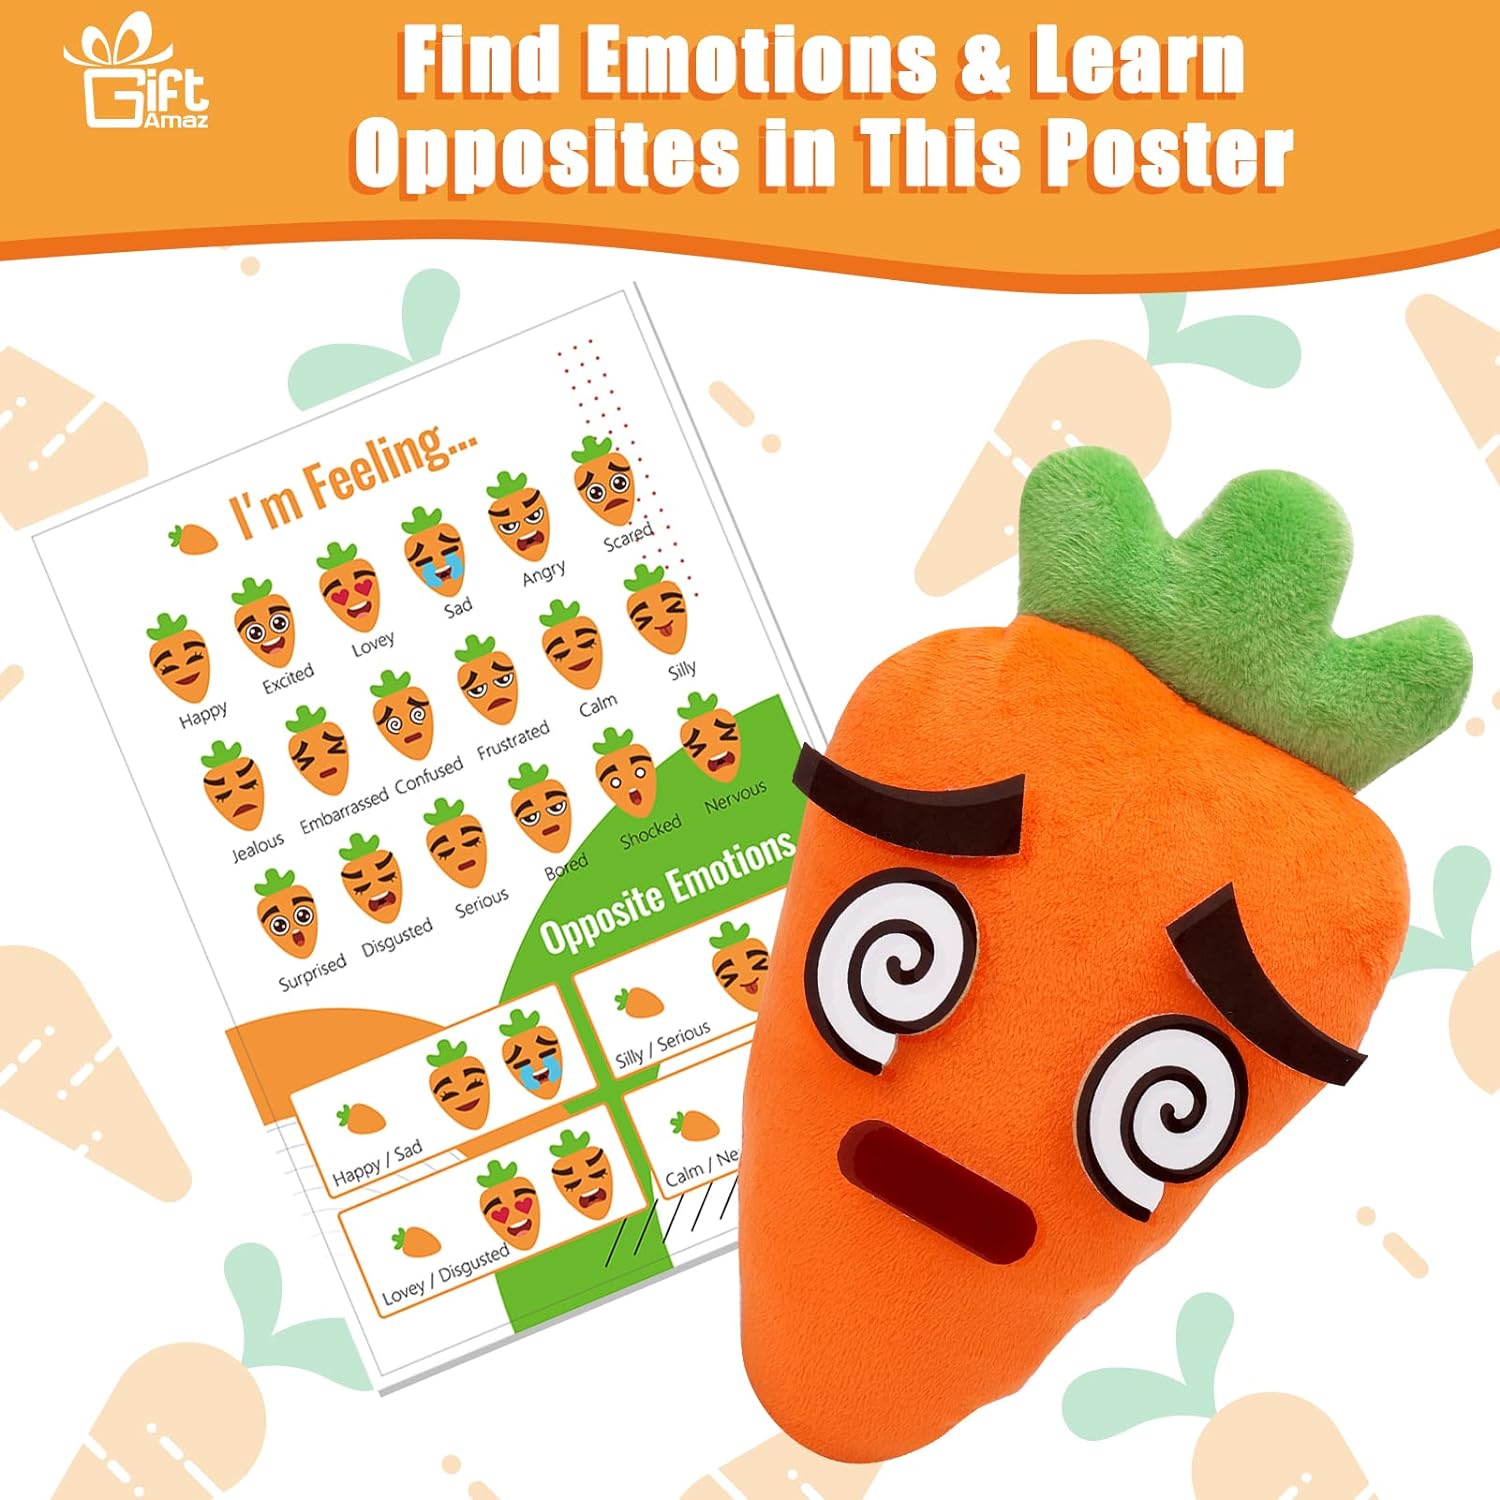 Great Choice Products Social Emotional Learning Toys - Big Feelings Carrot Social Emotional Games For Kids - 26 Facial Expressions, 10 Educational …